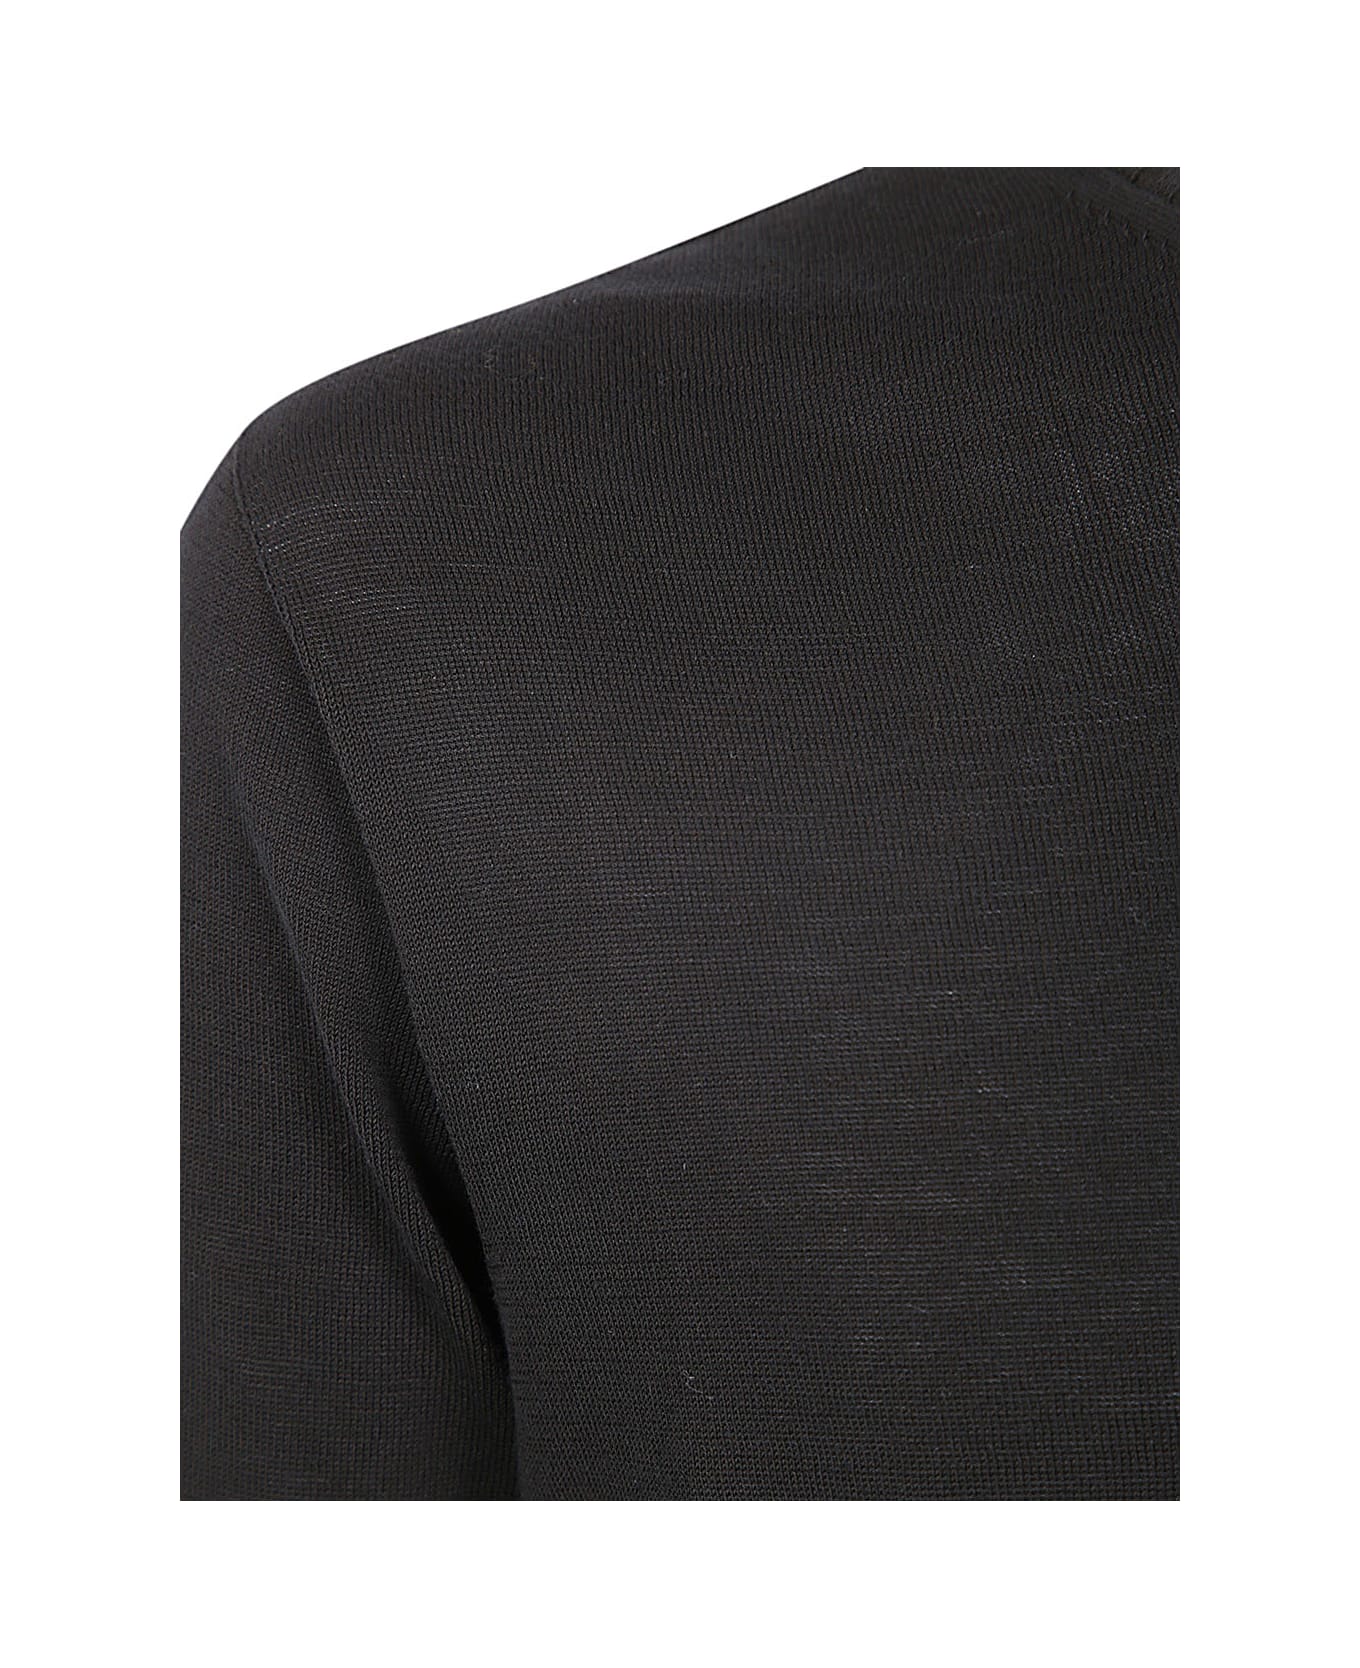 MD75 Classic Round Neck Pullover - Basic Black